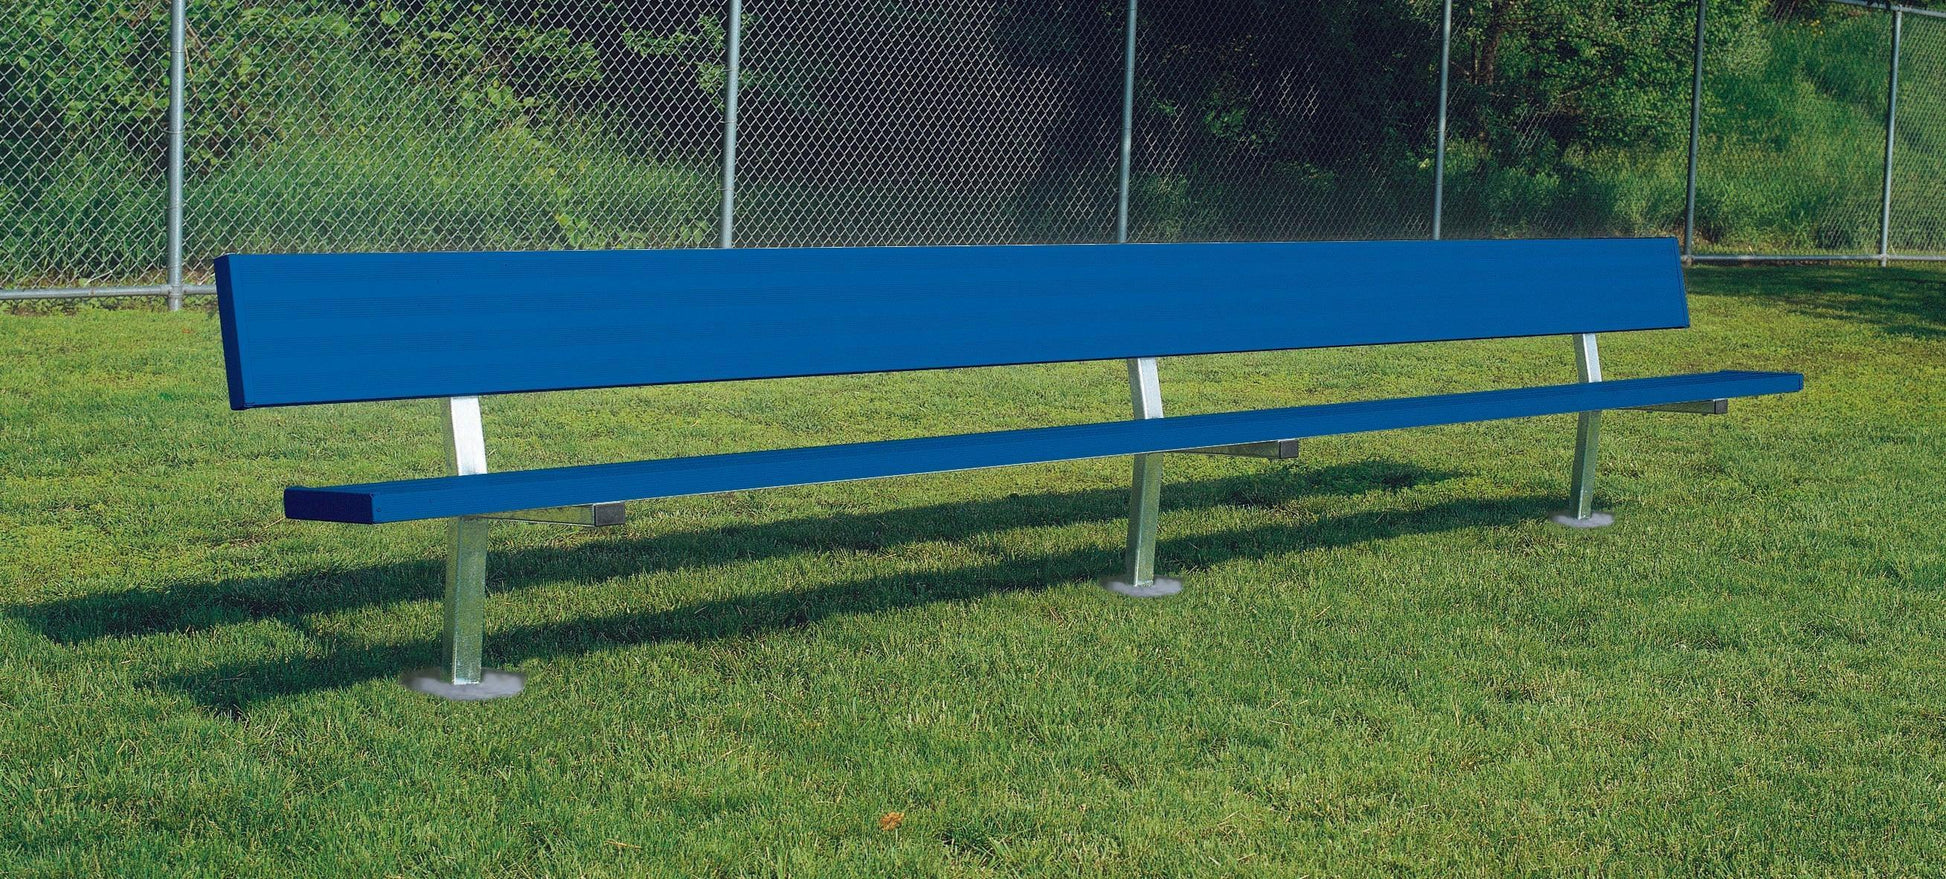 Player Bench with Backrest, Fixed or Portable - bisoninc